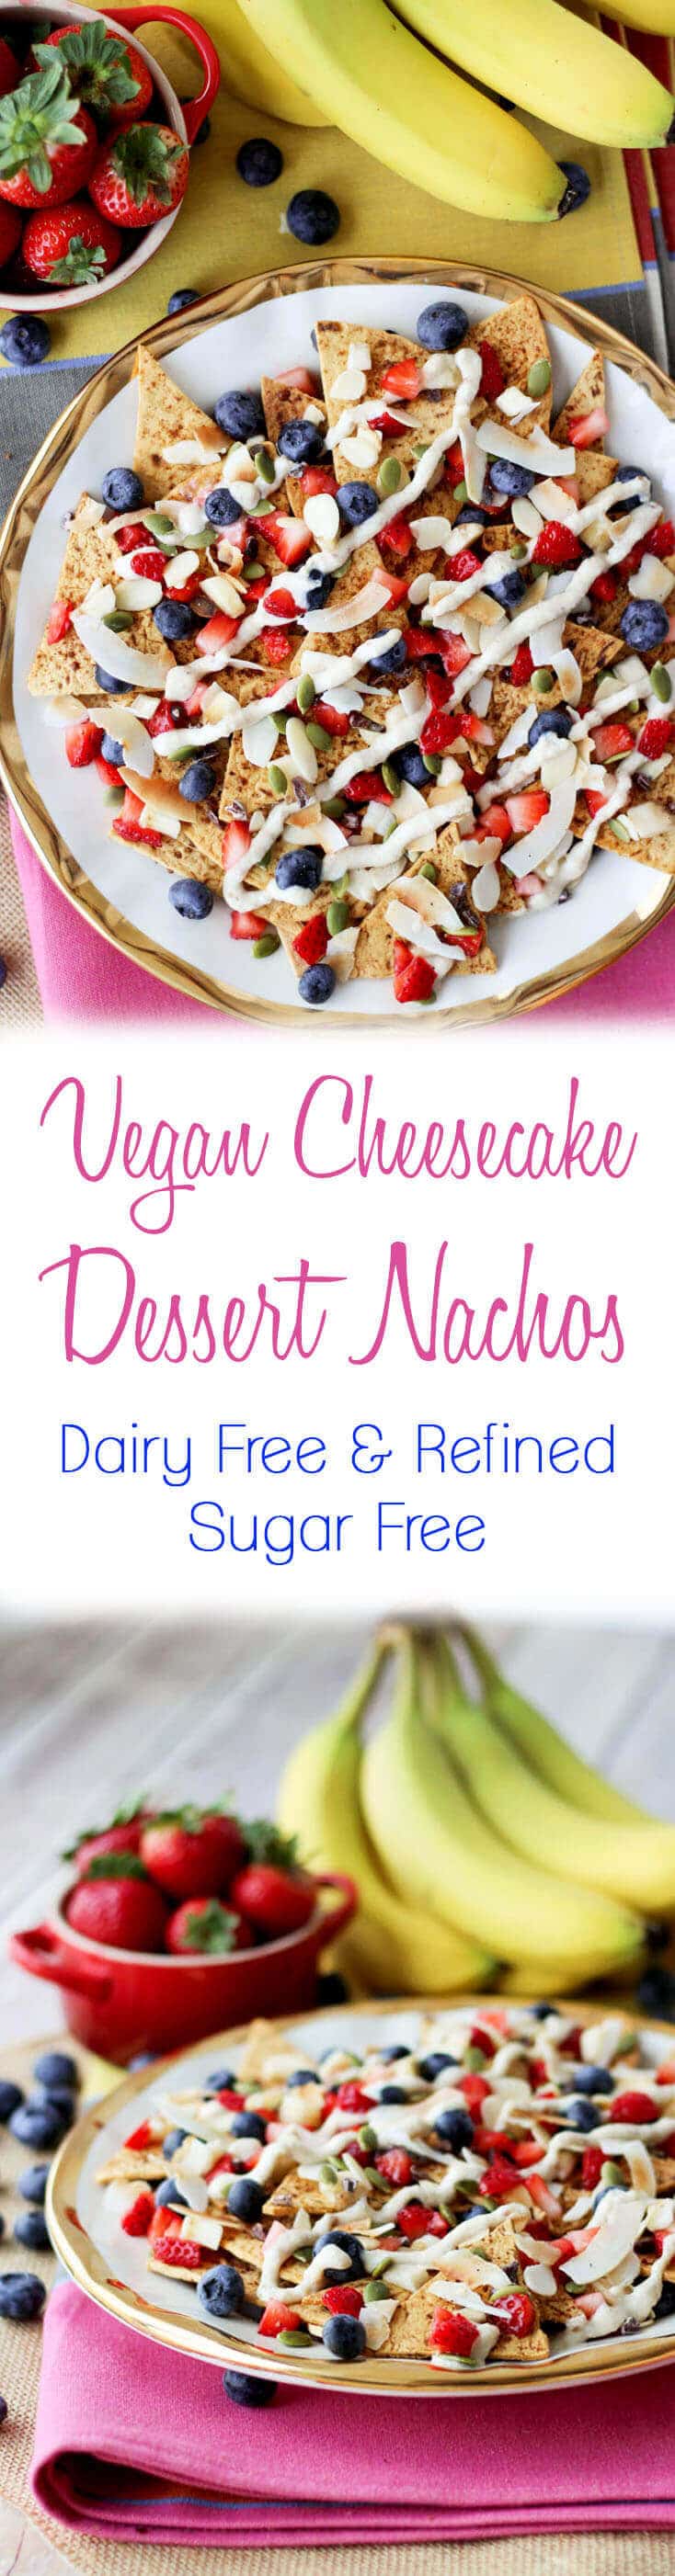 A plate of fruit on homemade nachos with the text overlay \"Vegan Cheesecake Dessert Nachos Dairy Free & Refined Sugar Free.\"